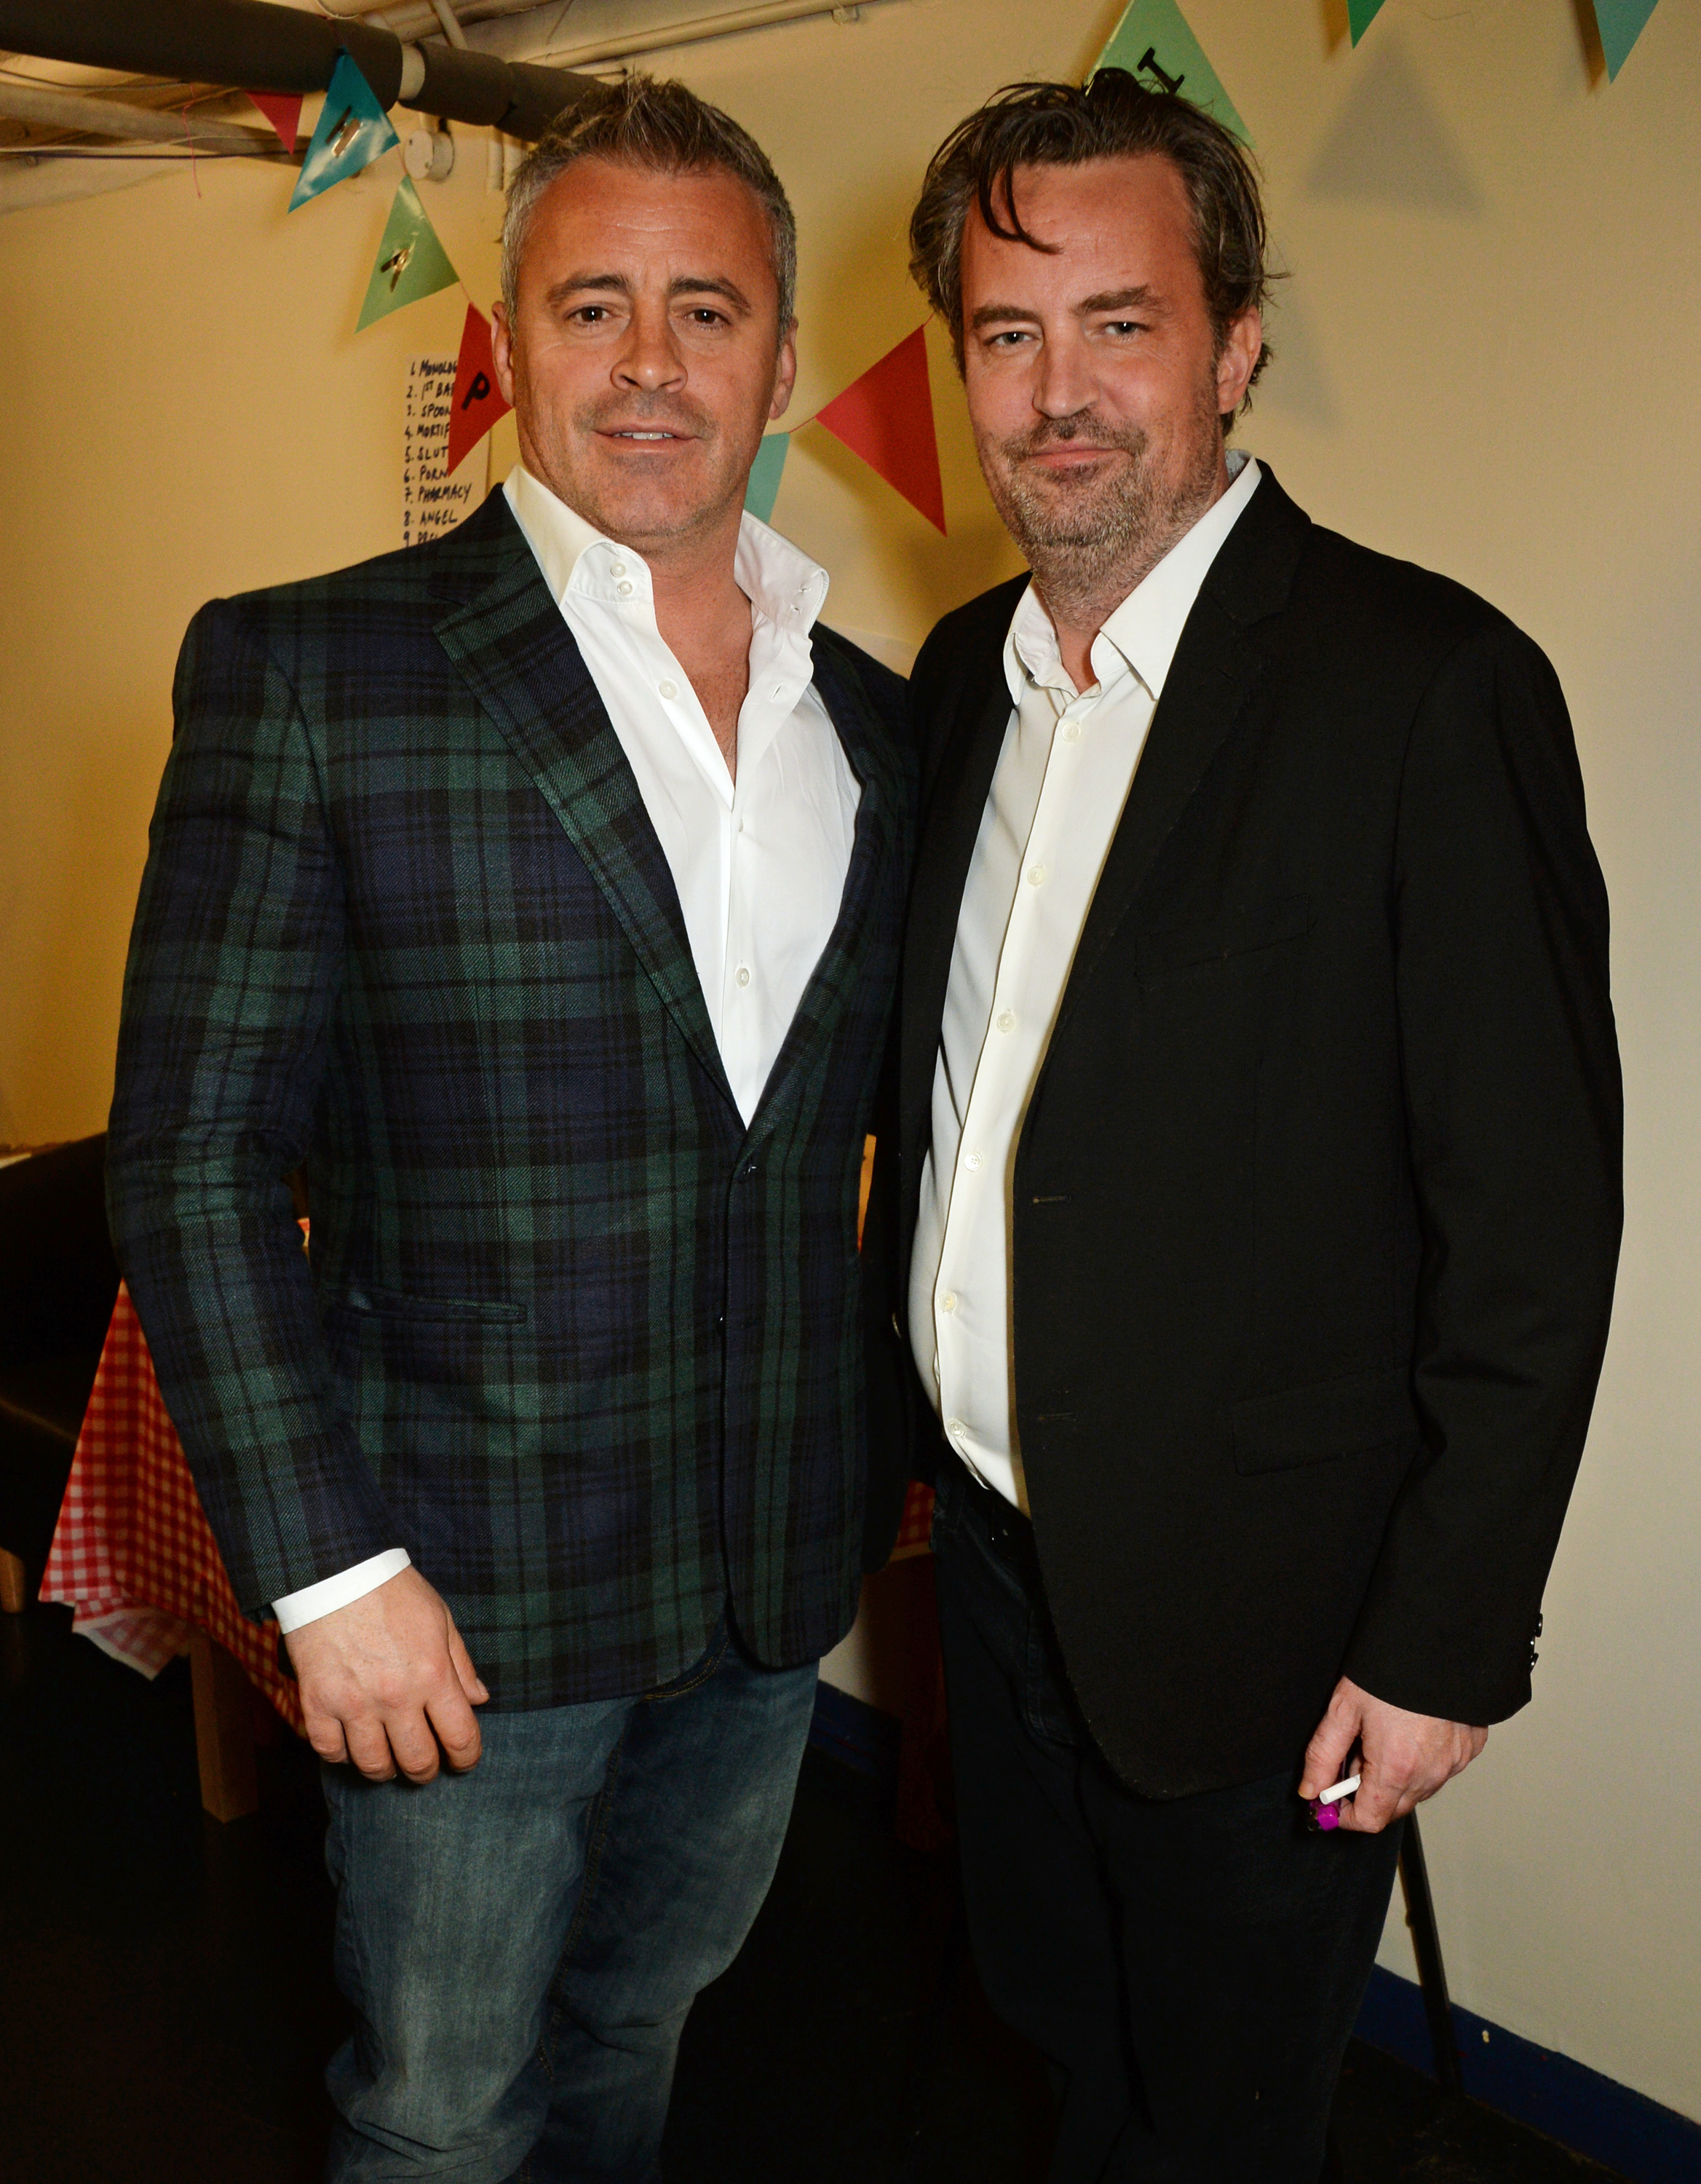 Matt LeBlanc and Matthew Perry backstage at the performance of "The End of Longing" in London, England on April 30, 2016 | Source: Getty Images